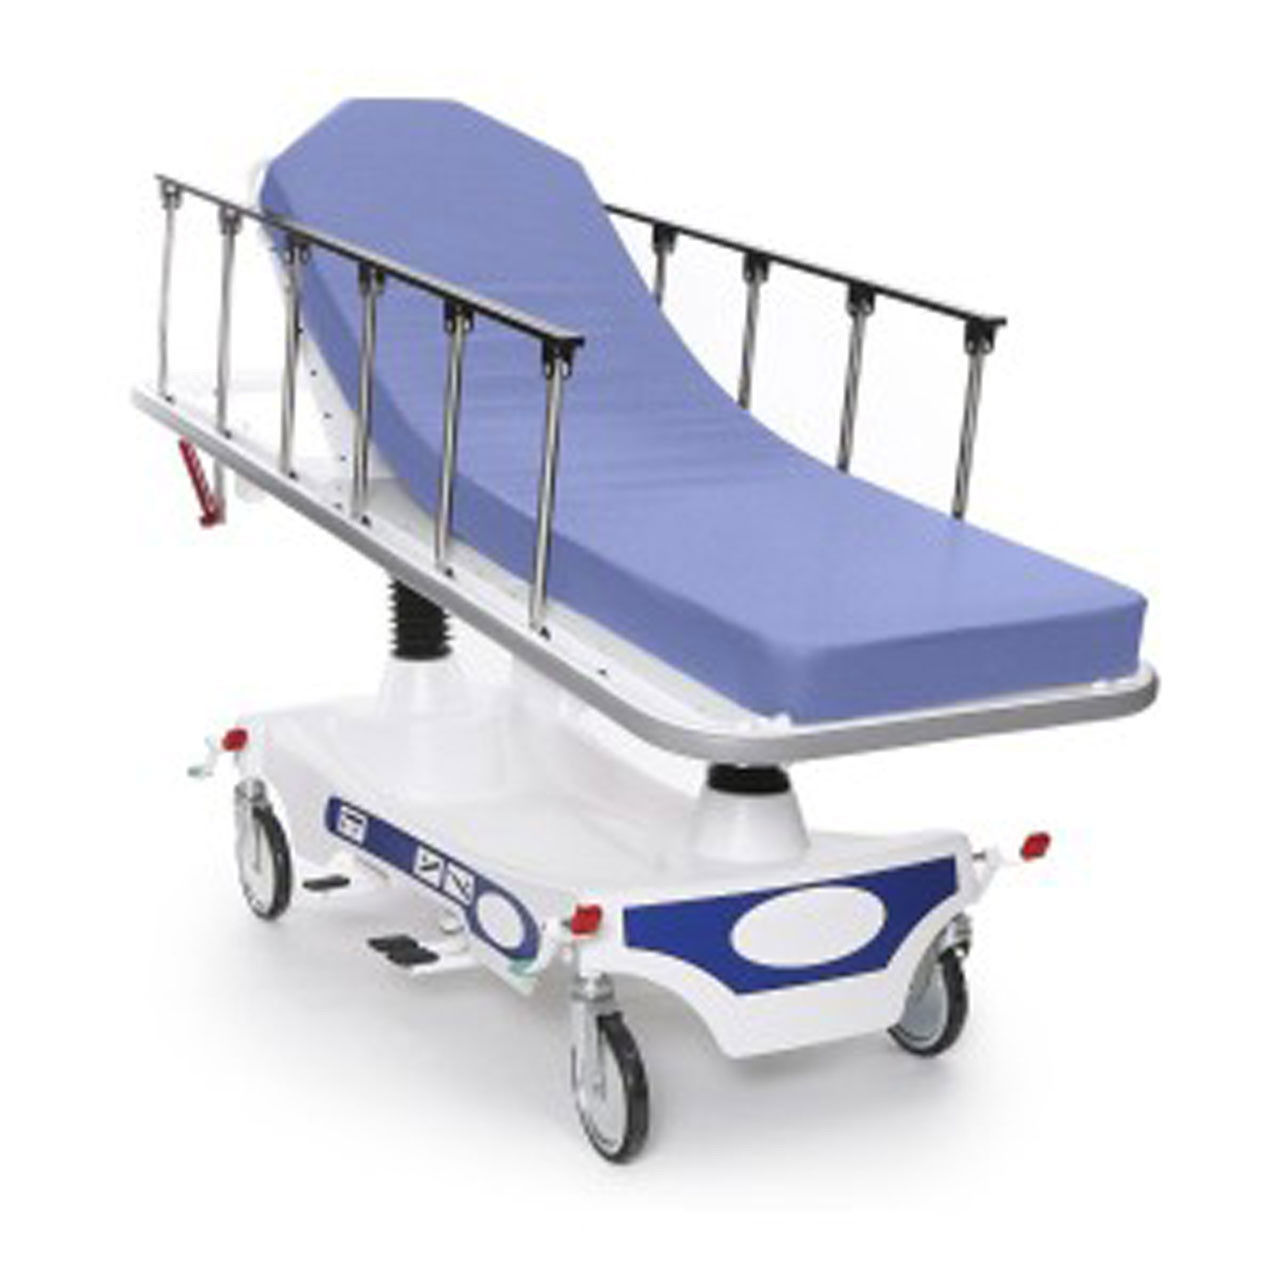 What is the estimated shipping time for the stretcher sheets?